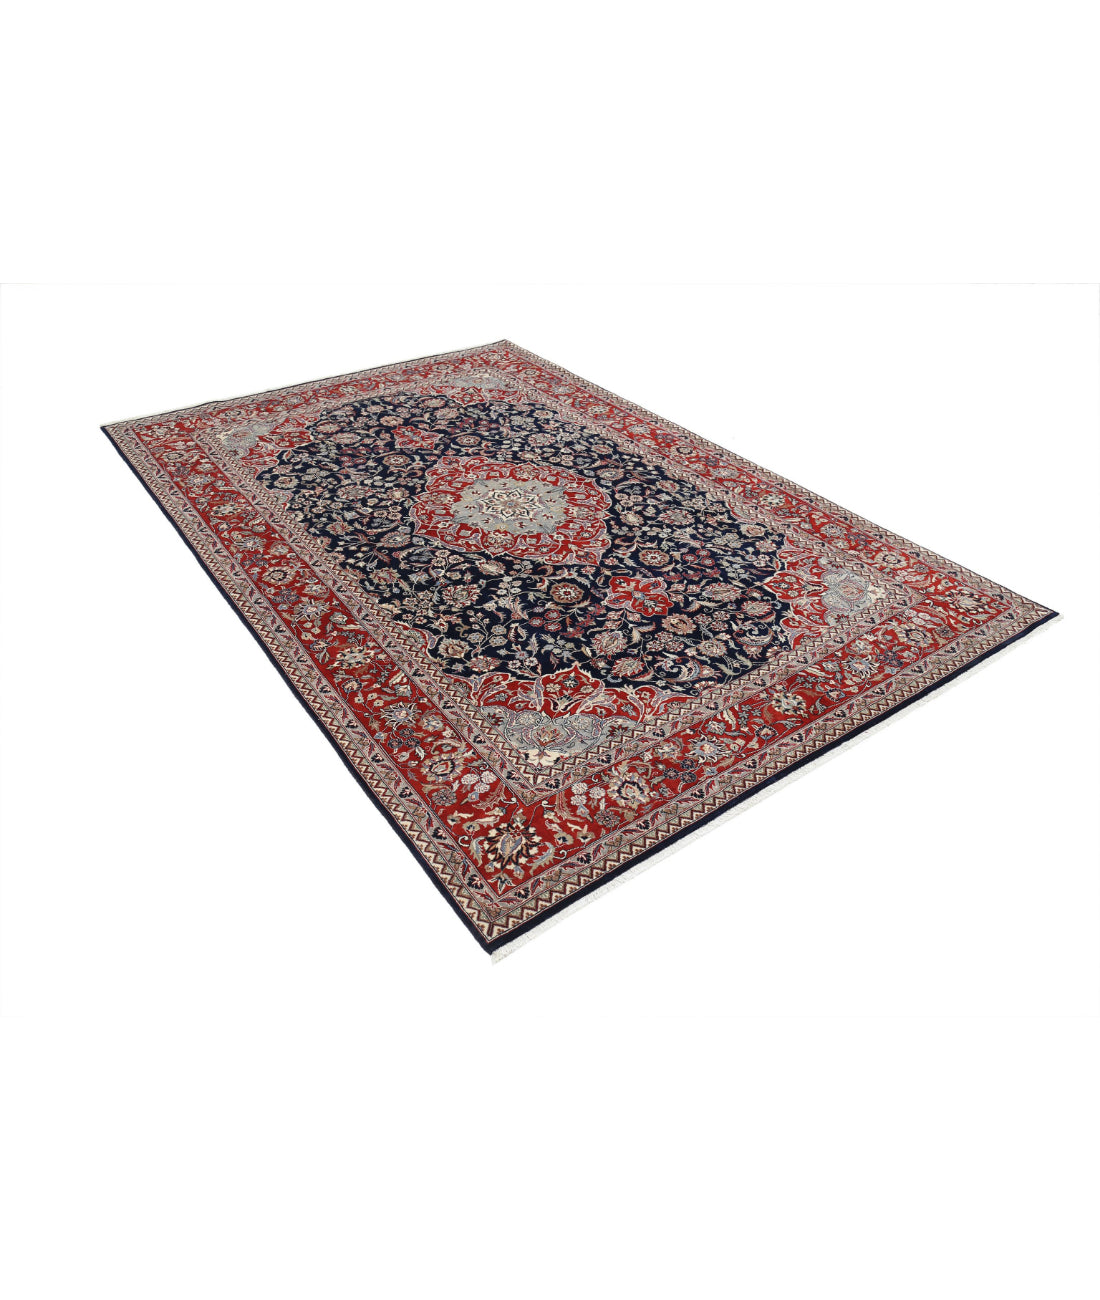 Hand Knotted Heritage Fine Persian Style Wool Rug - 6'0'' x 9'0'' 6'0'' x 9'0'' (180 X 270) / Blue / Red